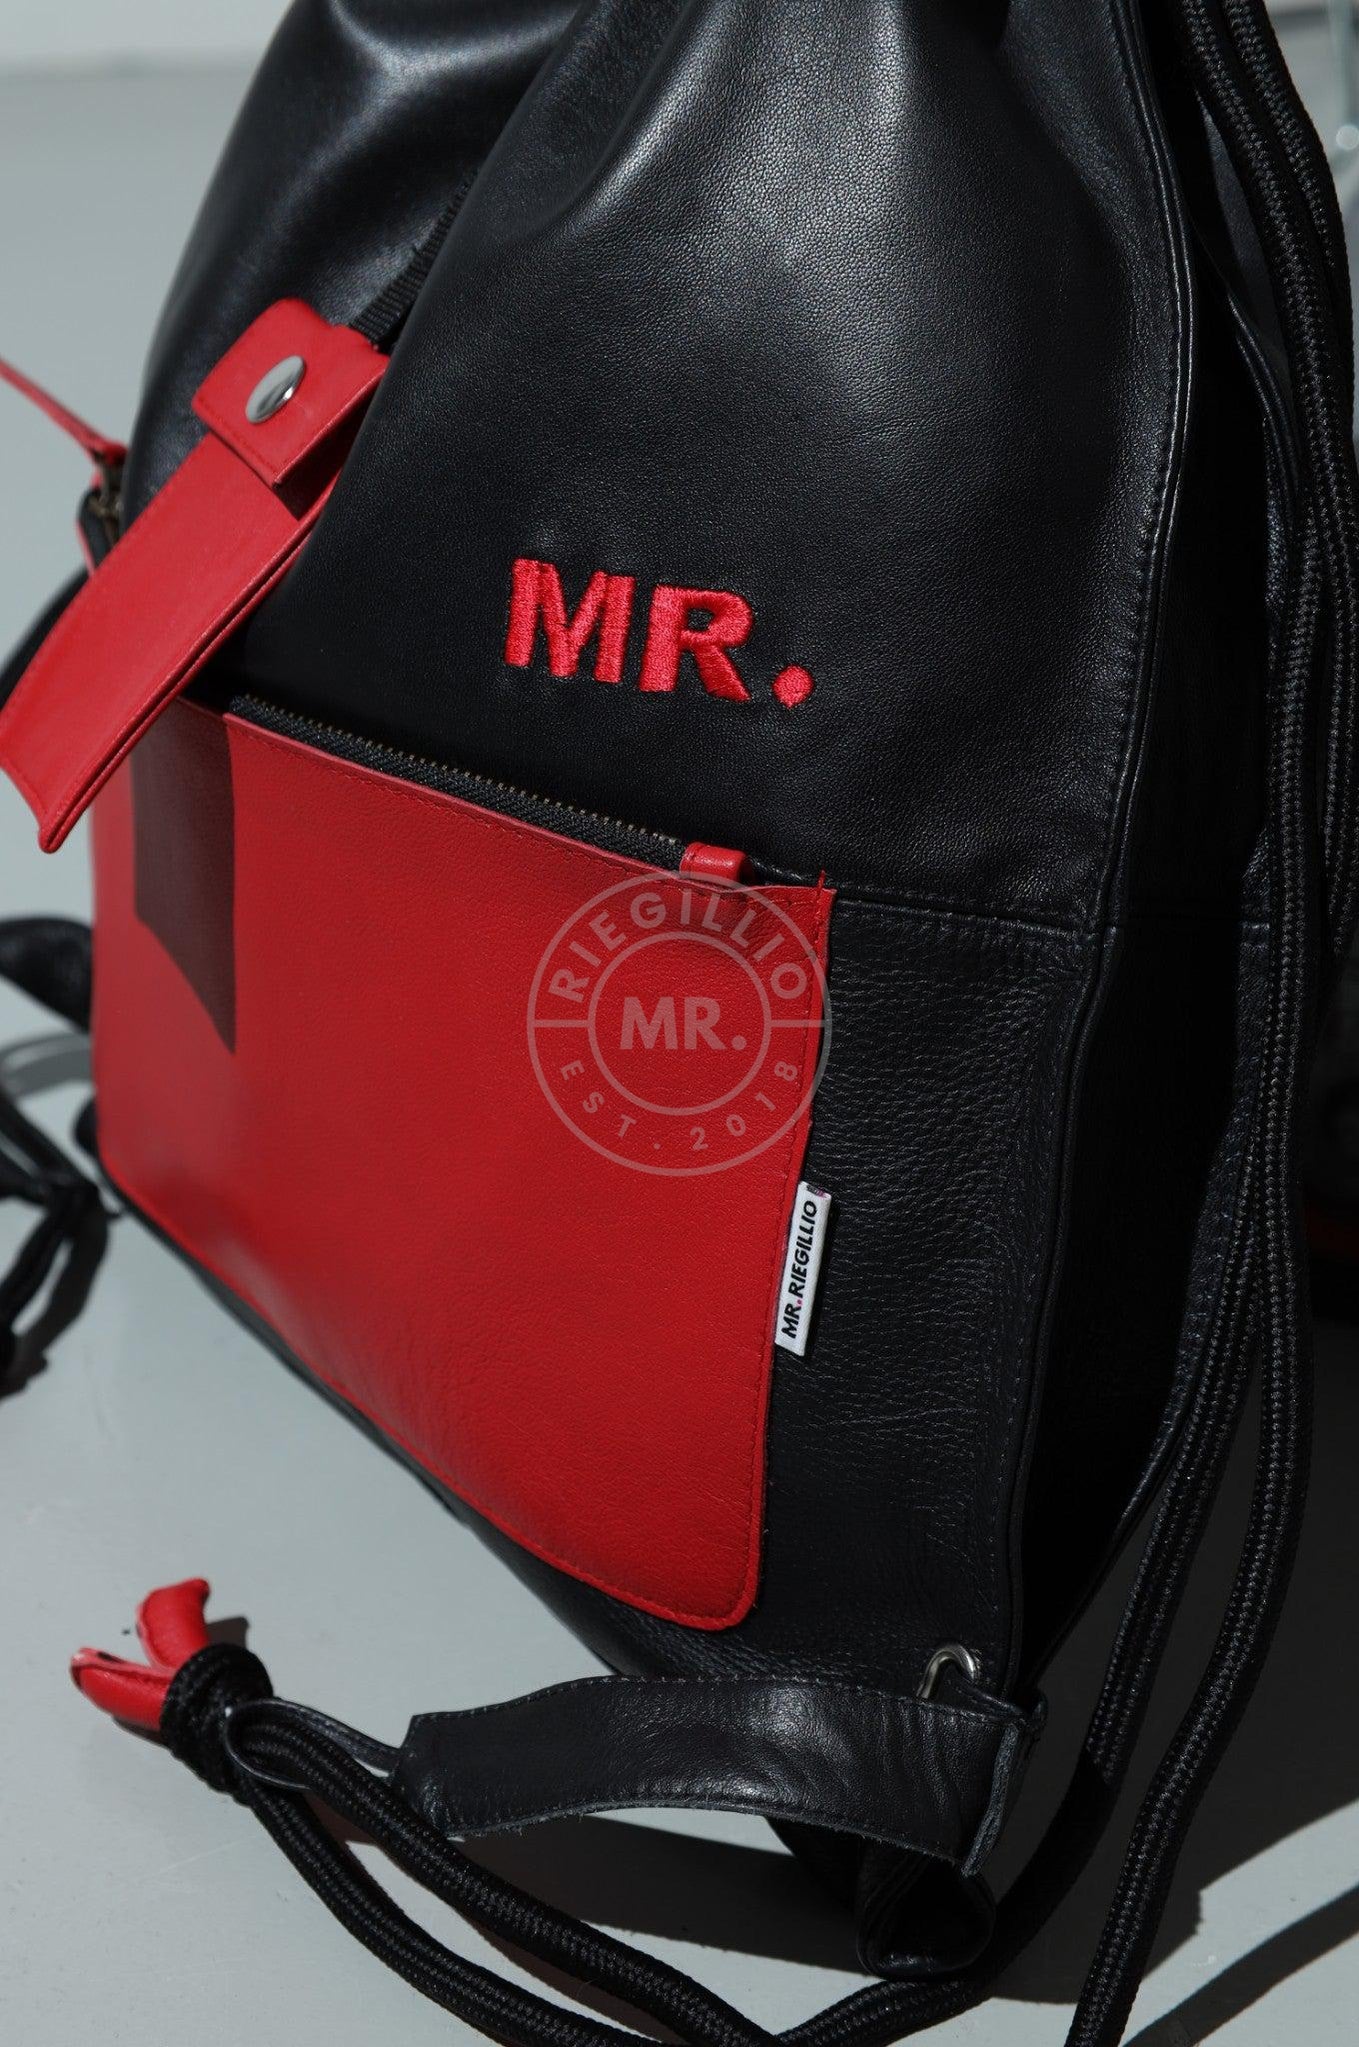 Leather Backpack Black - Red Touch-at MR. Riegillio